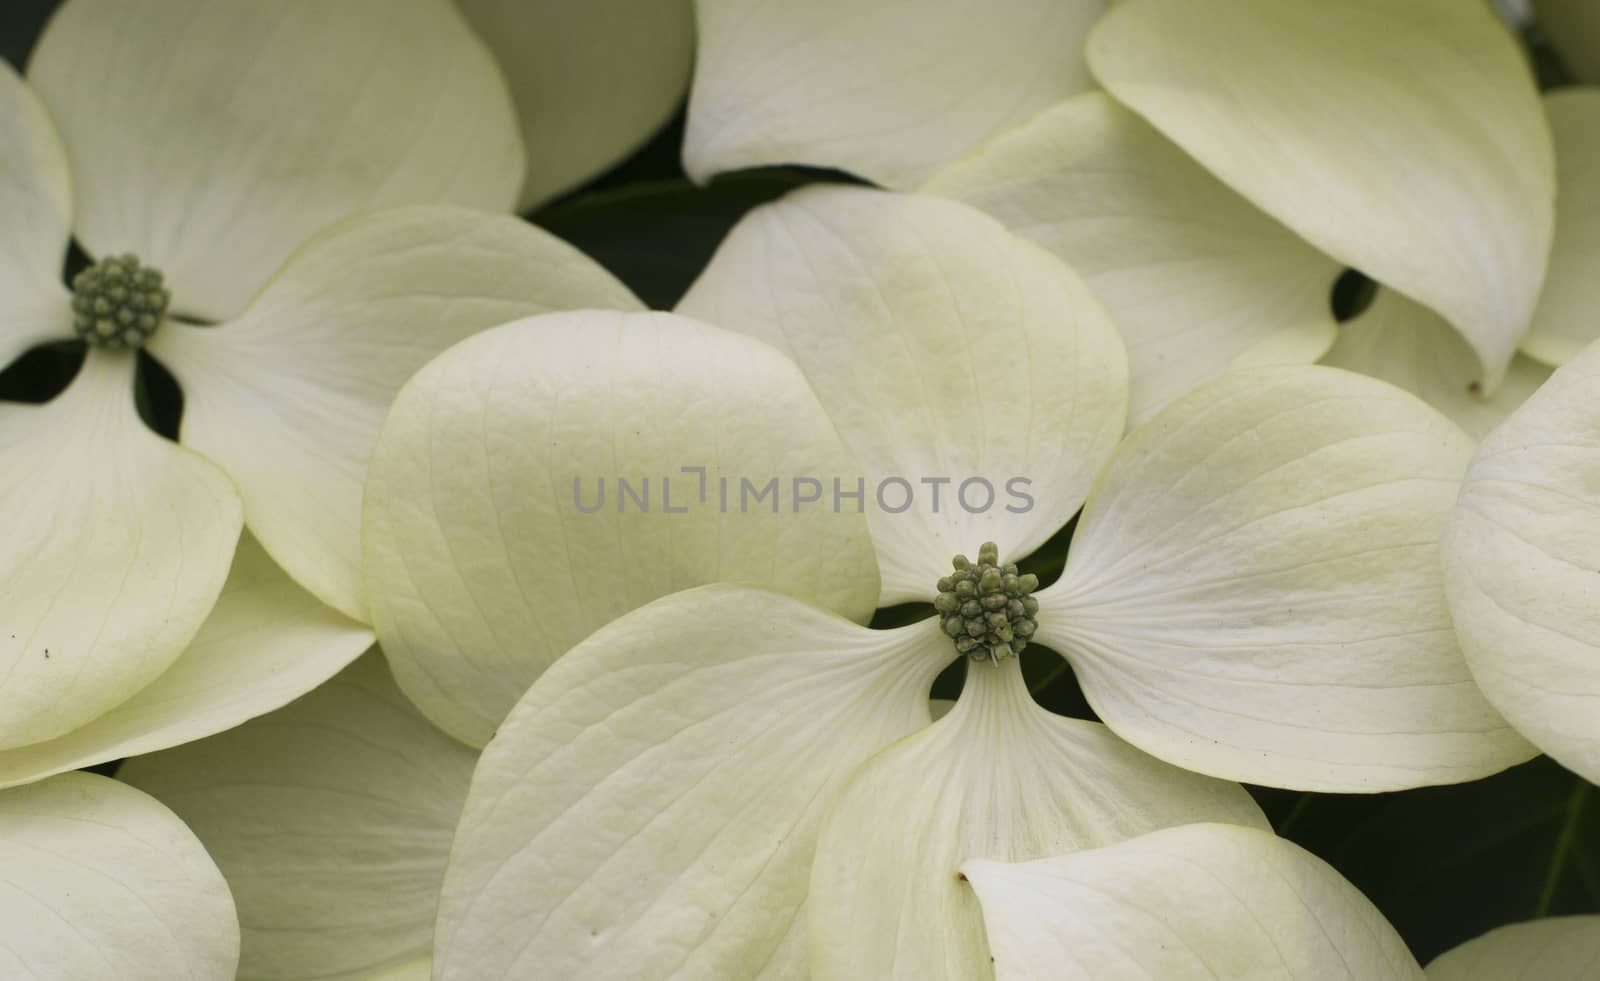 This dogwood flower pattern can be used as a wallpaper or background.
